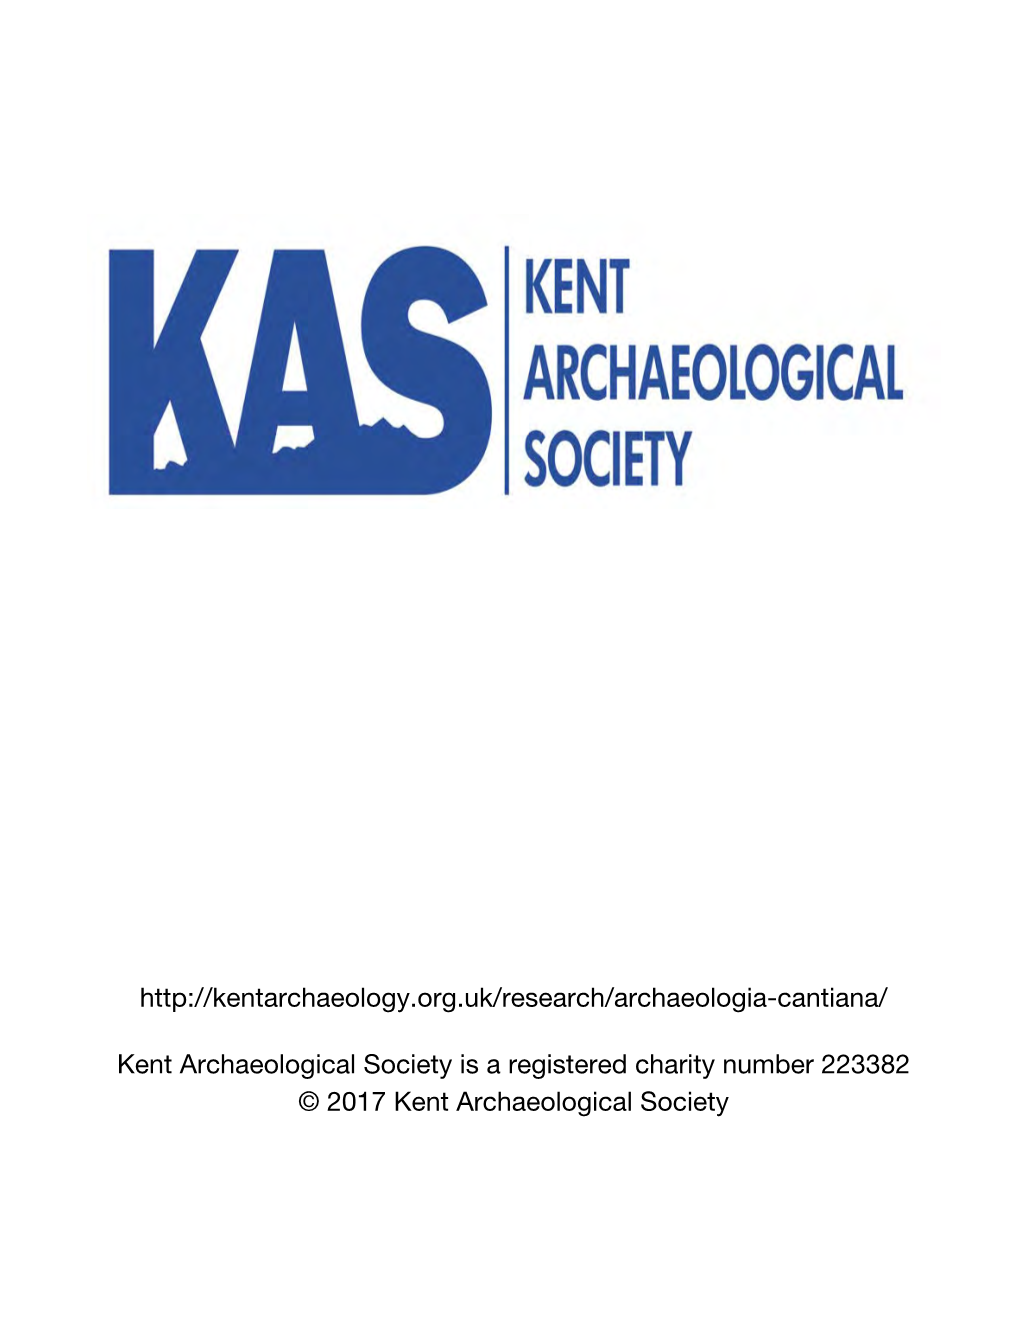 Annual Bibliography of Kentish Archaeology and History 2010